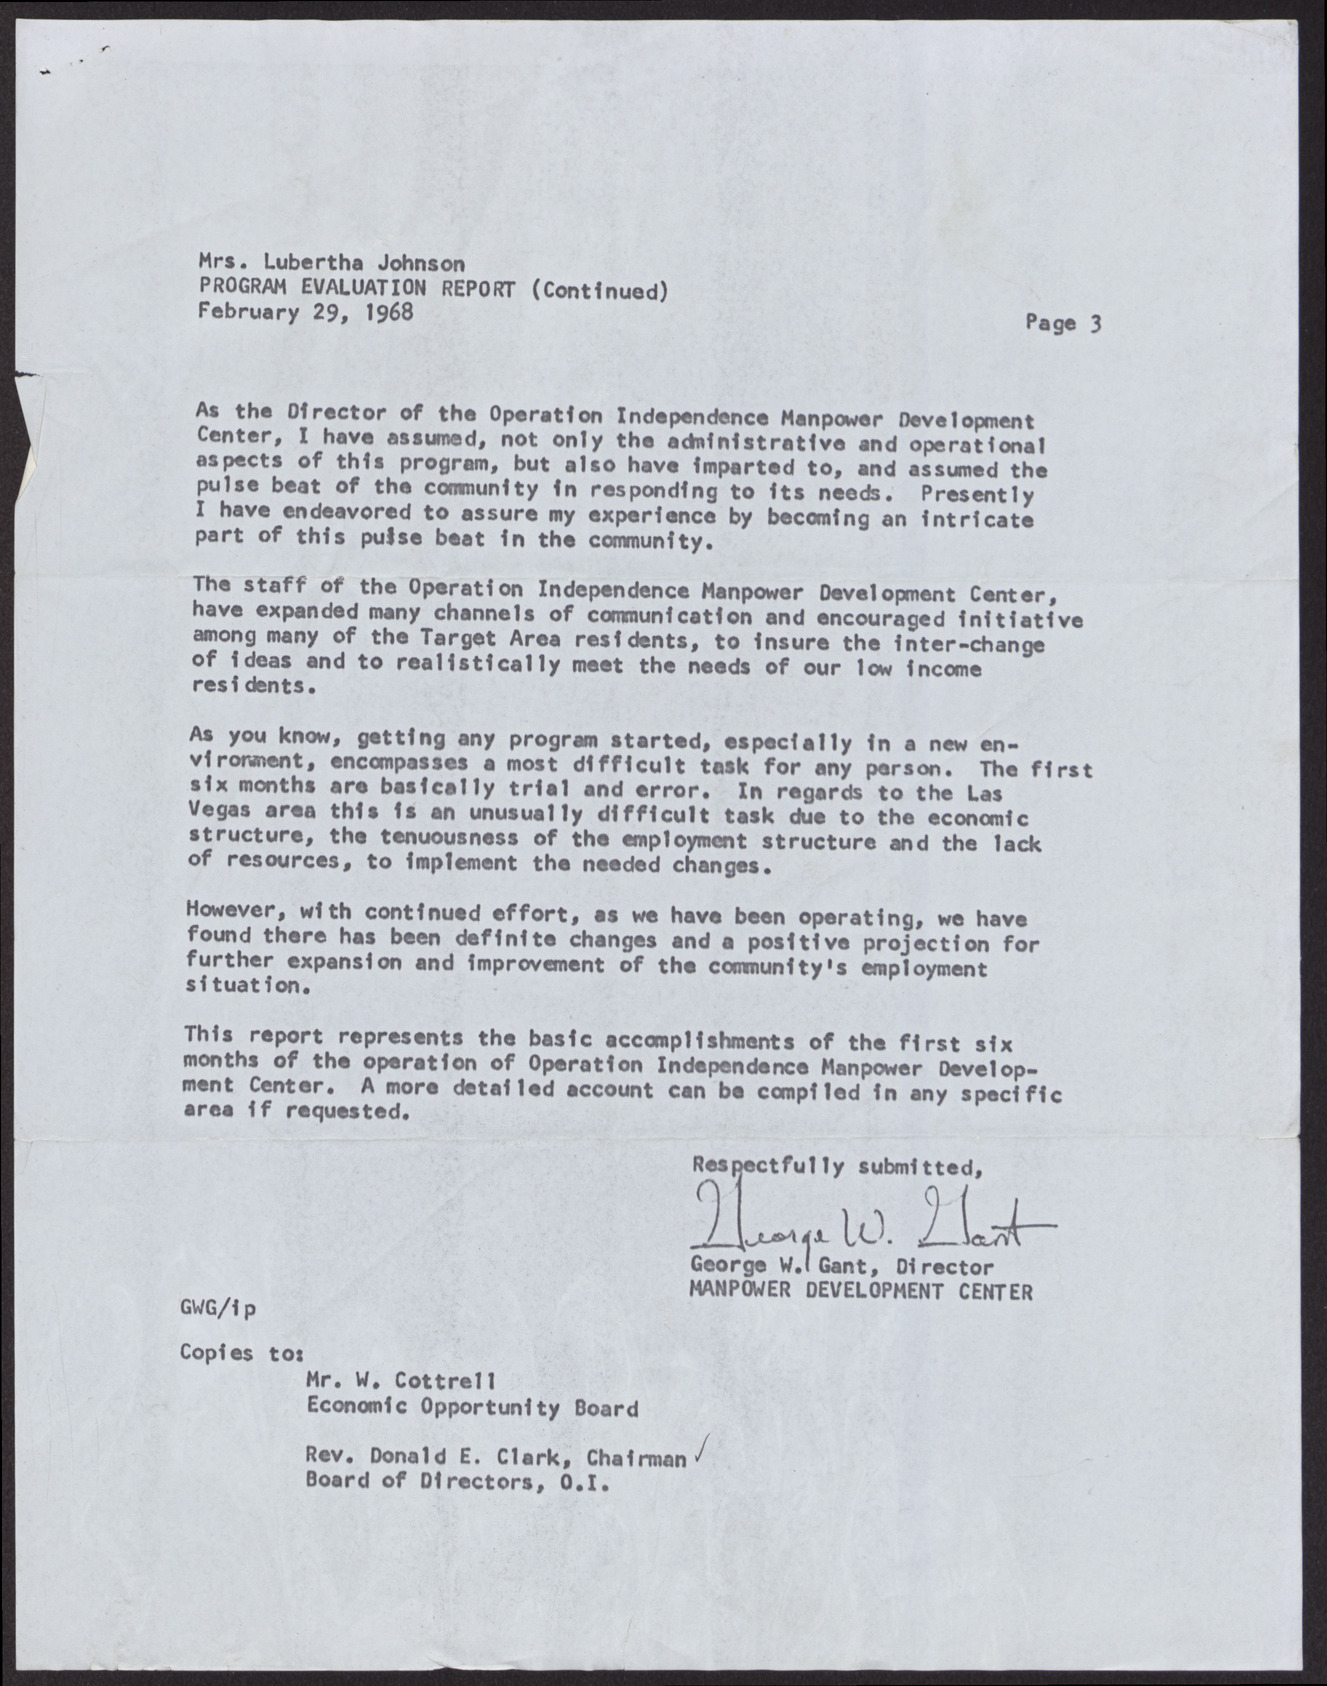 Letter to Mrs. Lubertha Johnson from George W. Gant (3 pages), February 29, 1968, page 3